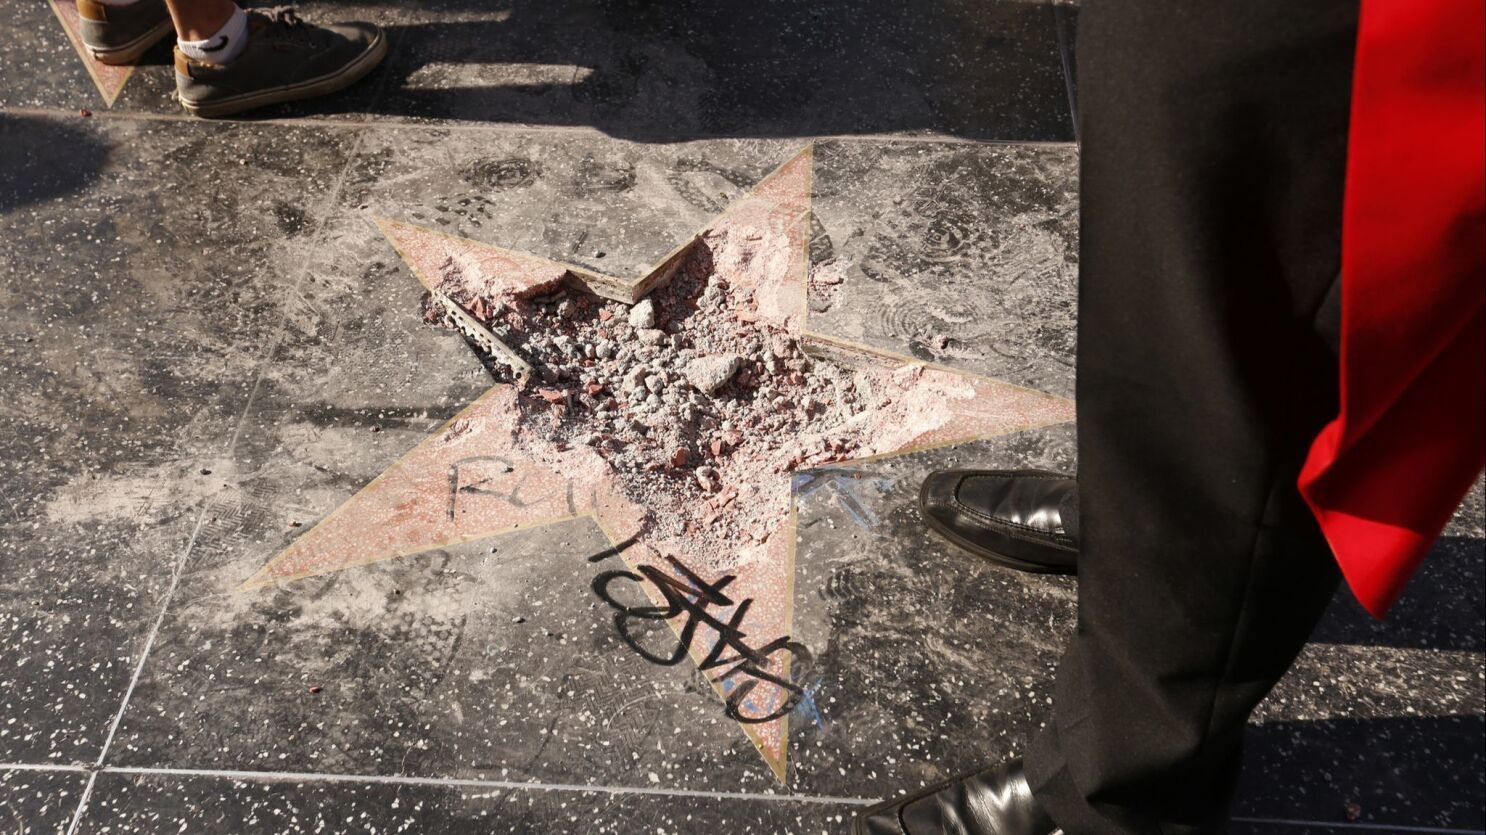 Trump S Hollywood Star Is A Reminder Of The Difference Between Celebrity And Goodness Los Angeles Times - trump star hollywood brawl